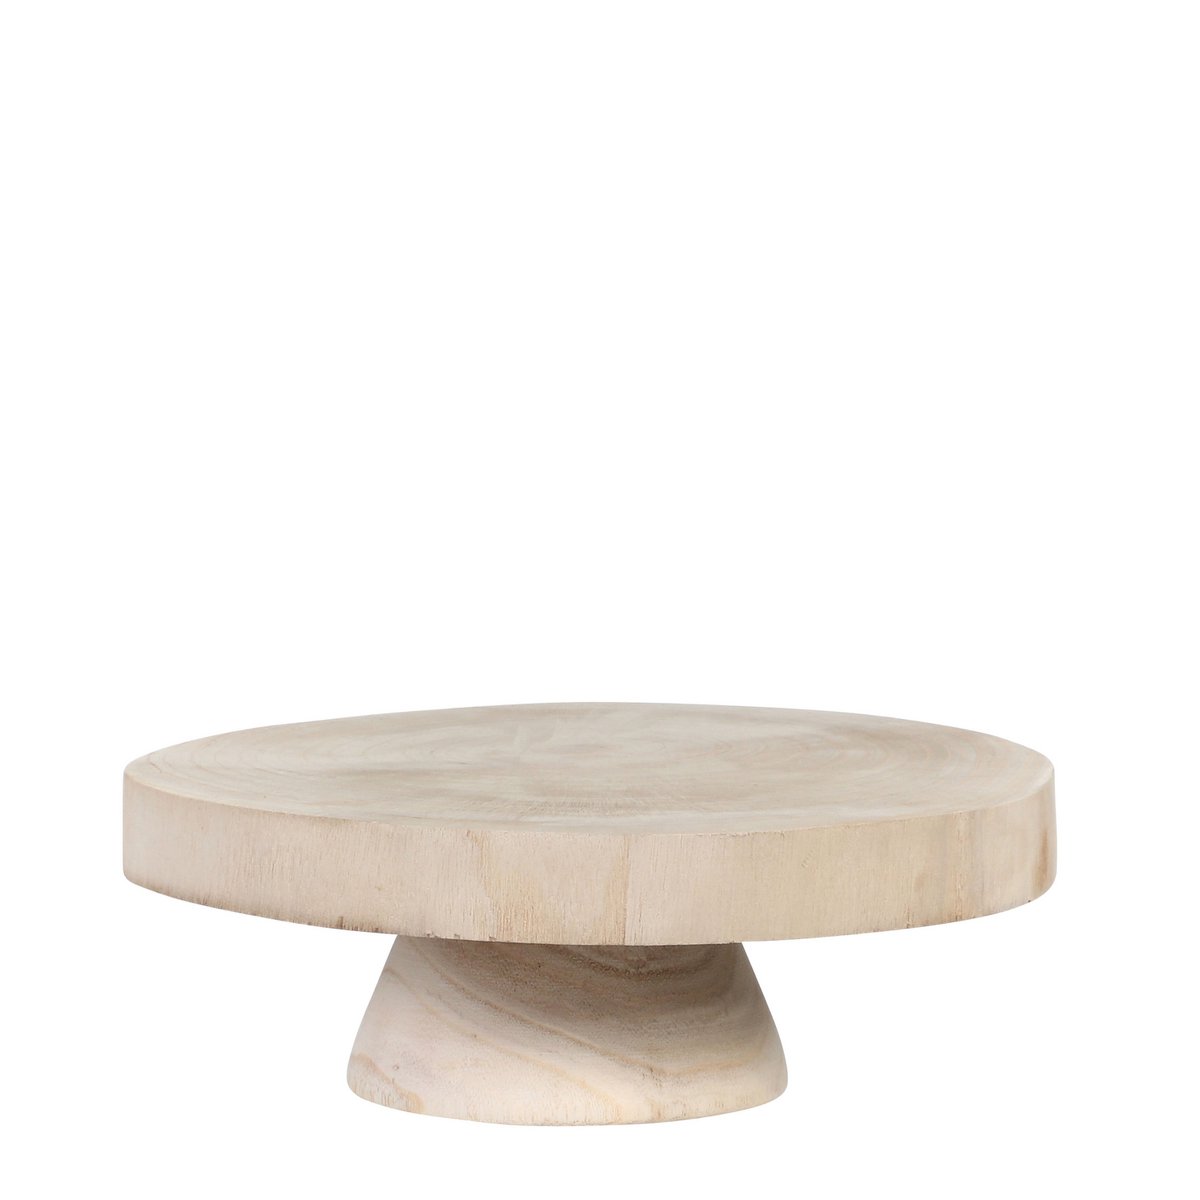 Small decorative table Pia made of wood - H10.5 x Ø30 cm